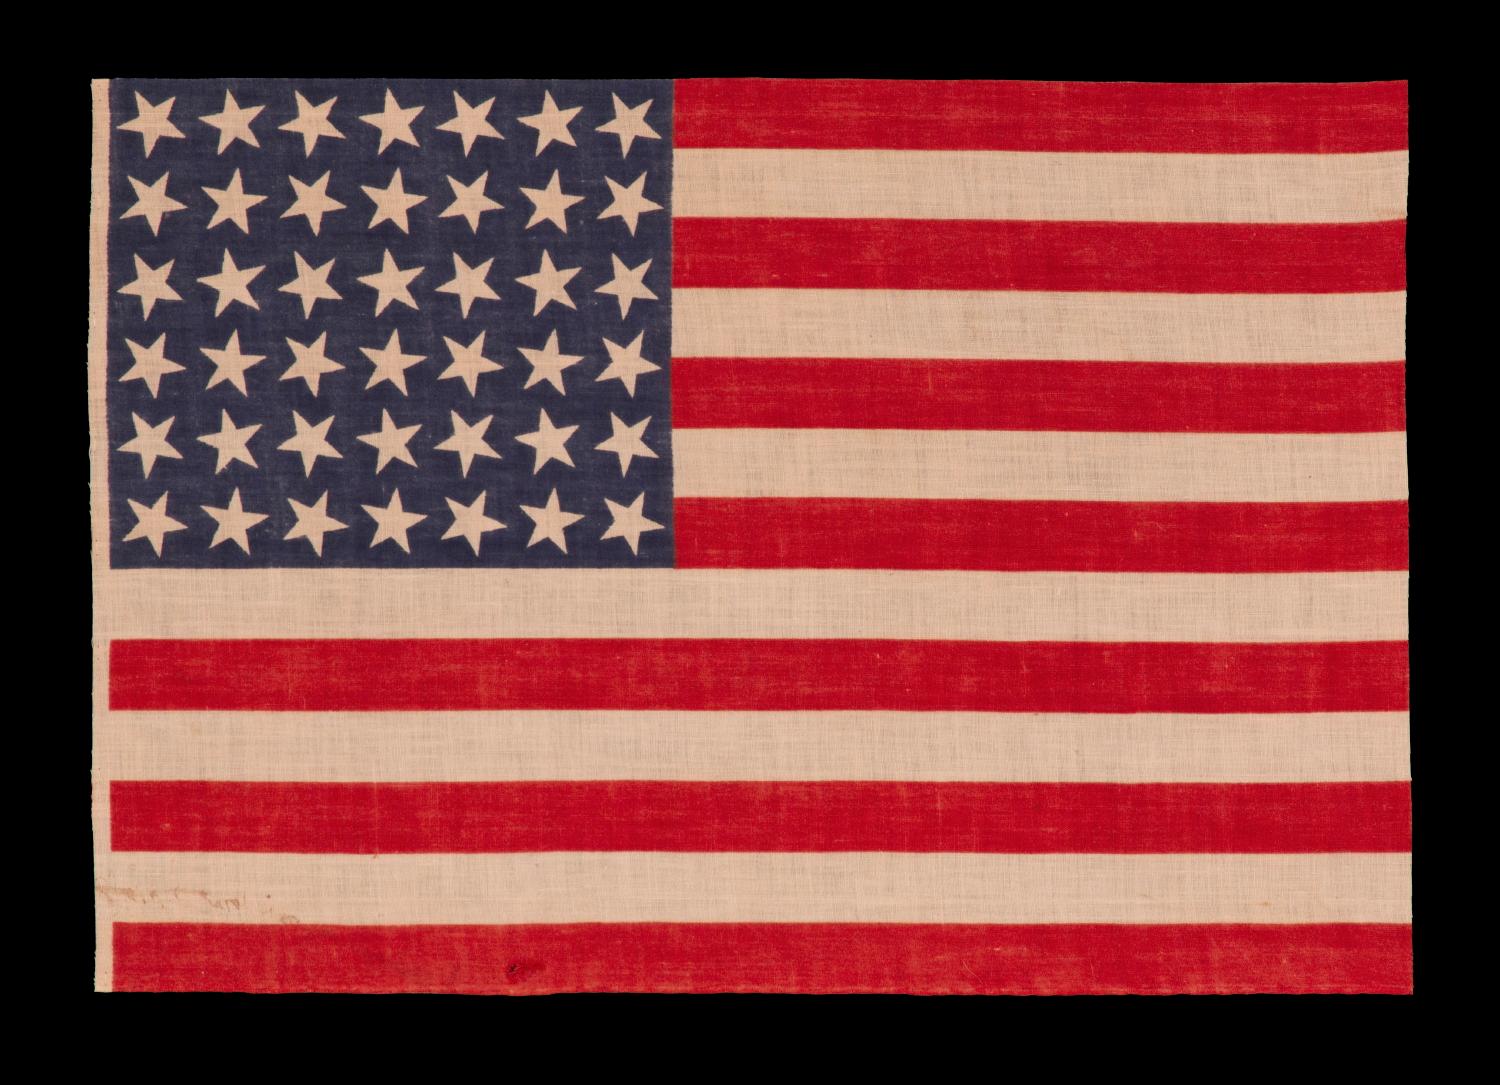 42 STARS, AN UNOFFICIAL STAR COUNT, ON AN ANTIQUE AMERICAN FLAG WITH SCATTERED STAR POSITIONING, 1889-1890, WASHINGTON STATEHOOD 

42 star parade flag, printed on cotton muslin. The stars are arranged in a rectilinear fashion, but vary in position